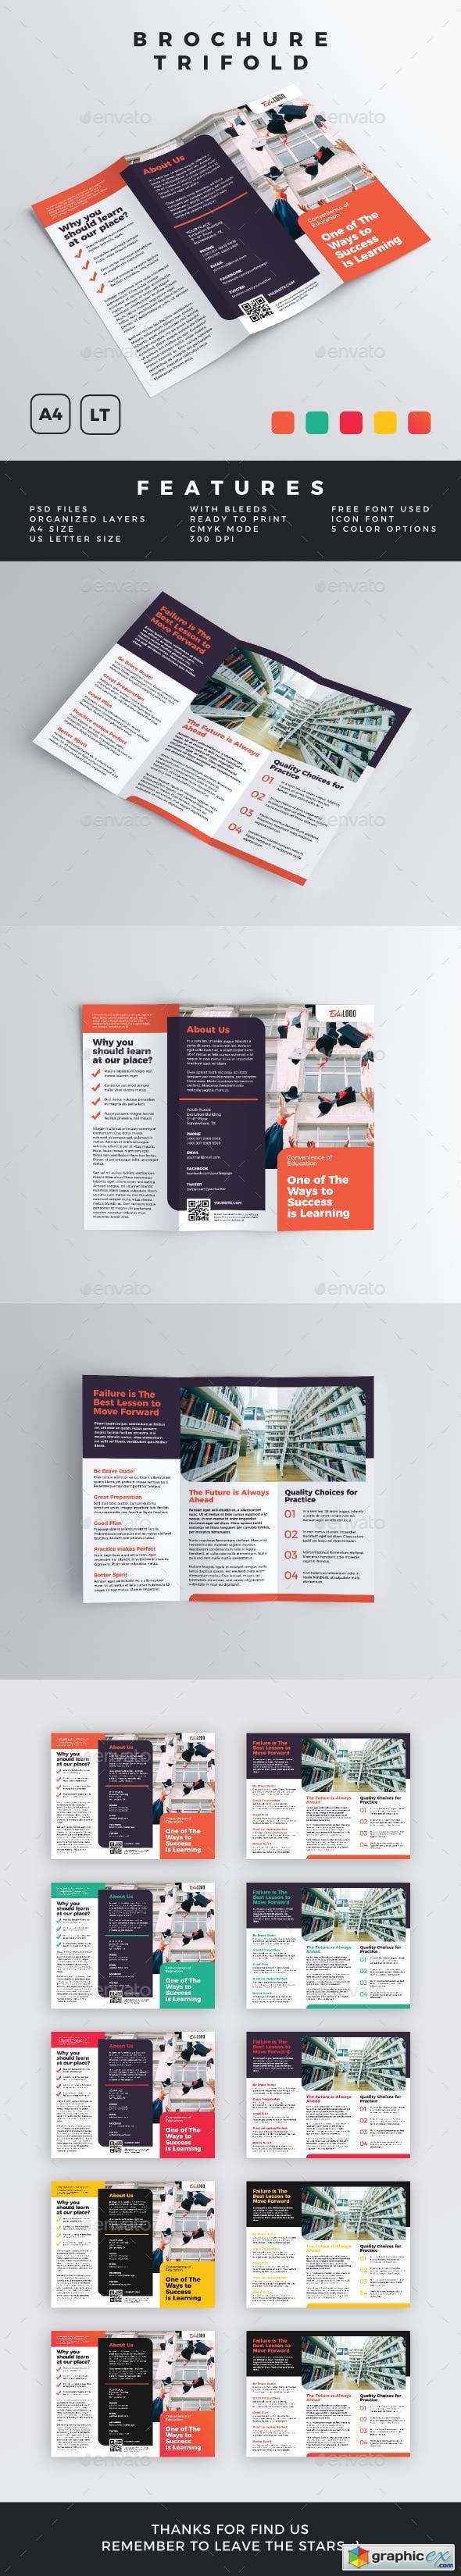 Brochure - Trifold 22879400